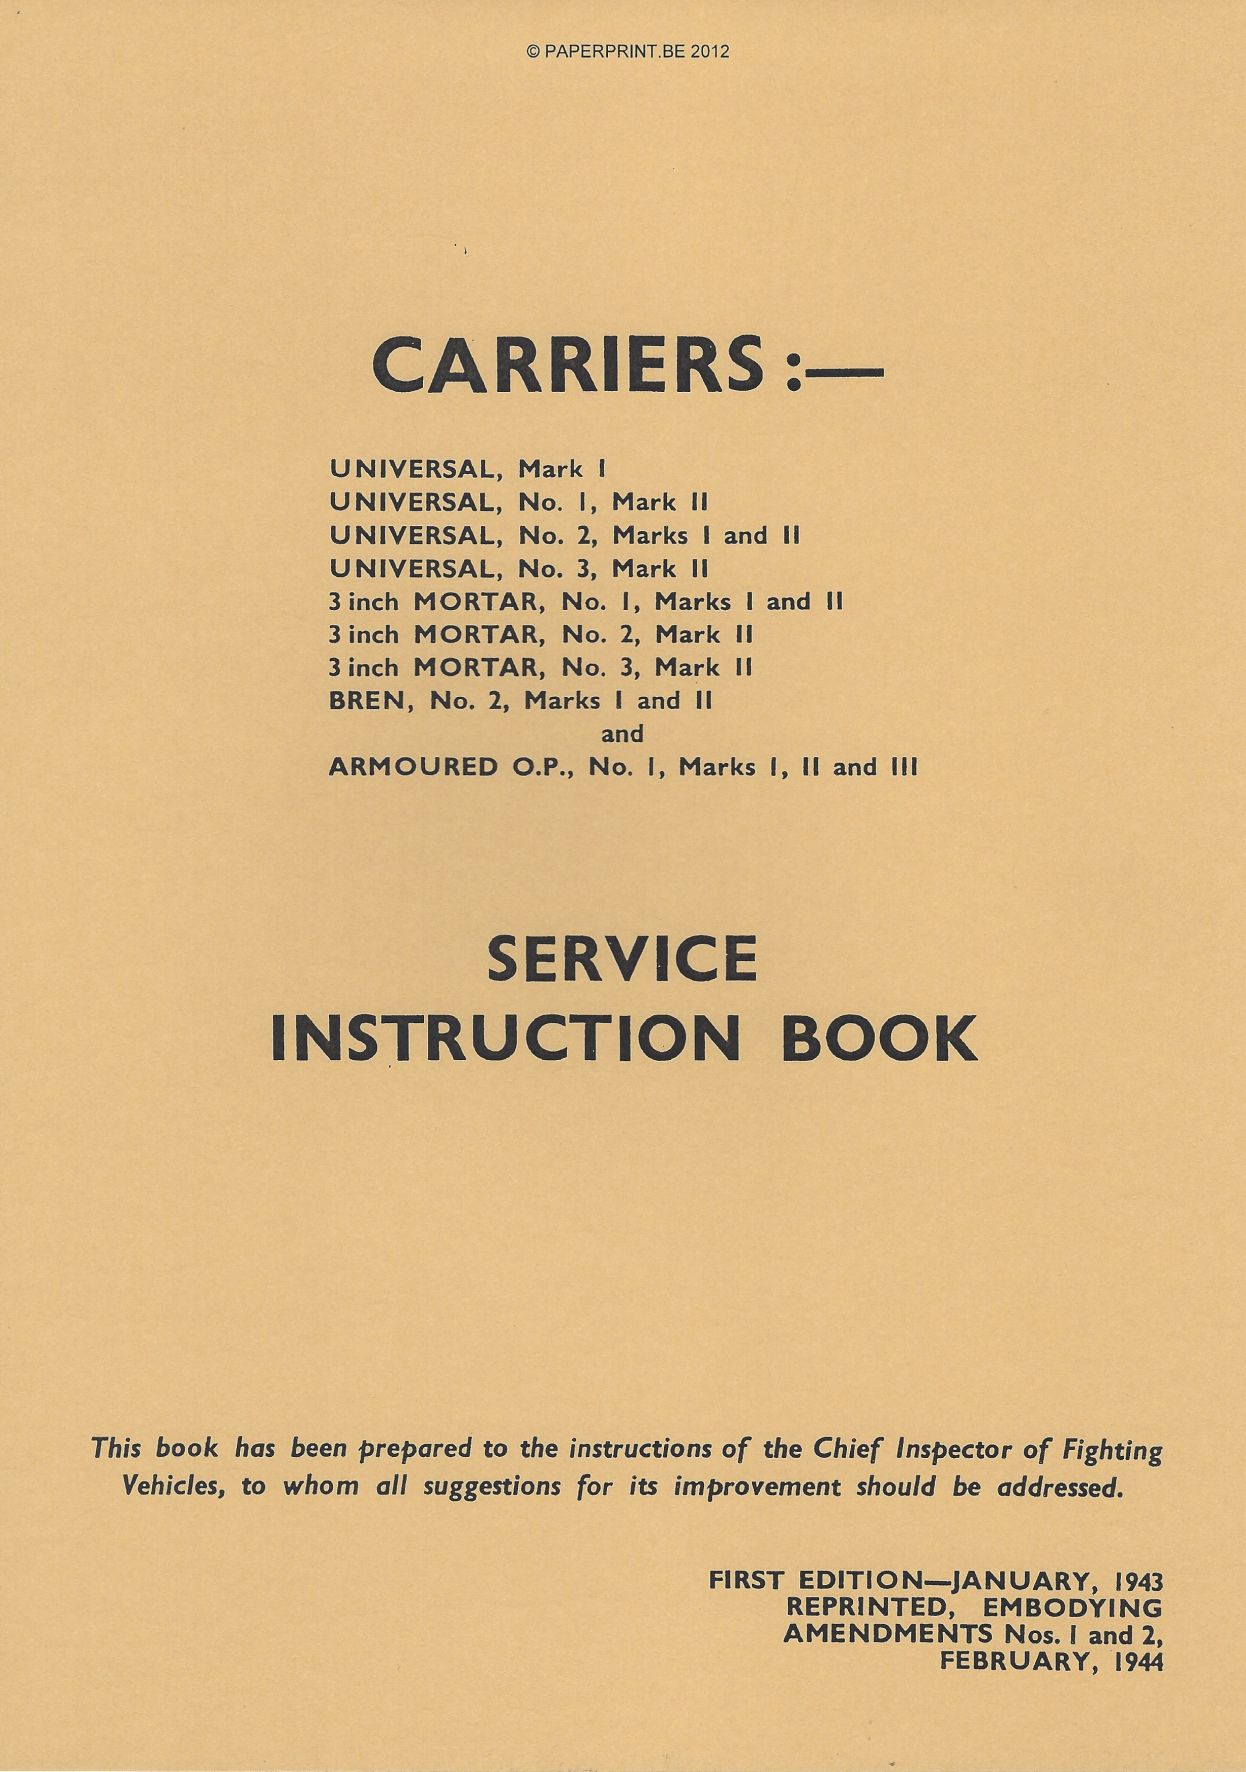 CARRIERS SERVICE INSTRUCTION BOOK